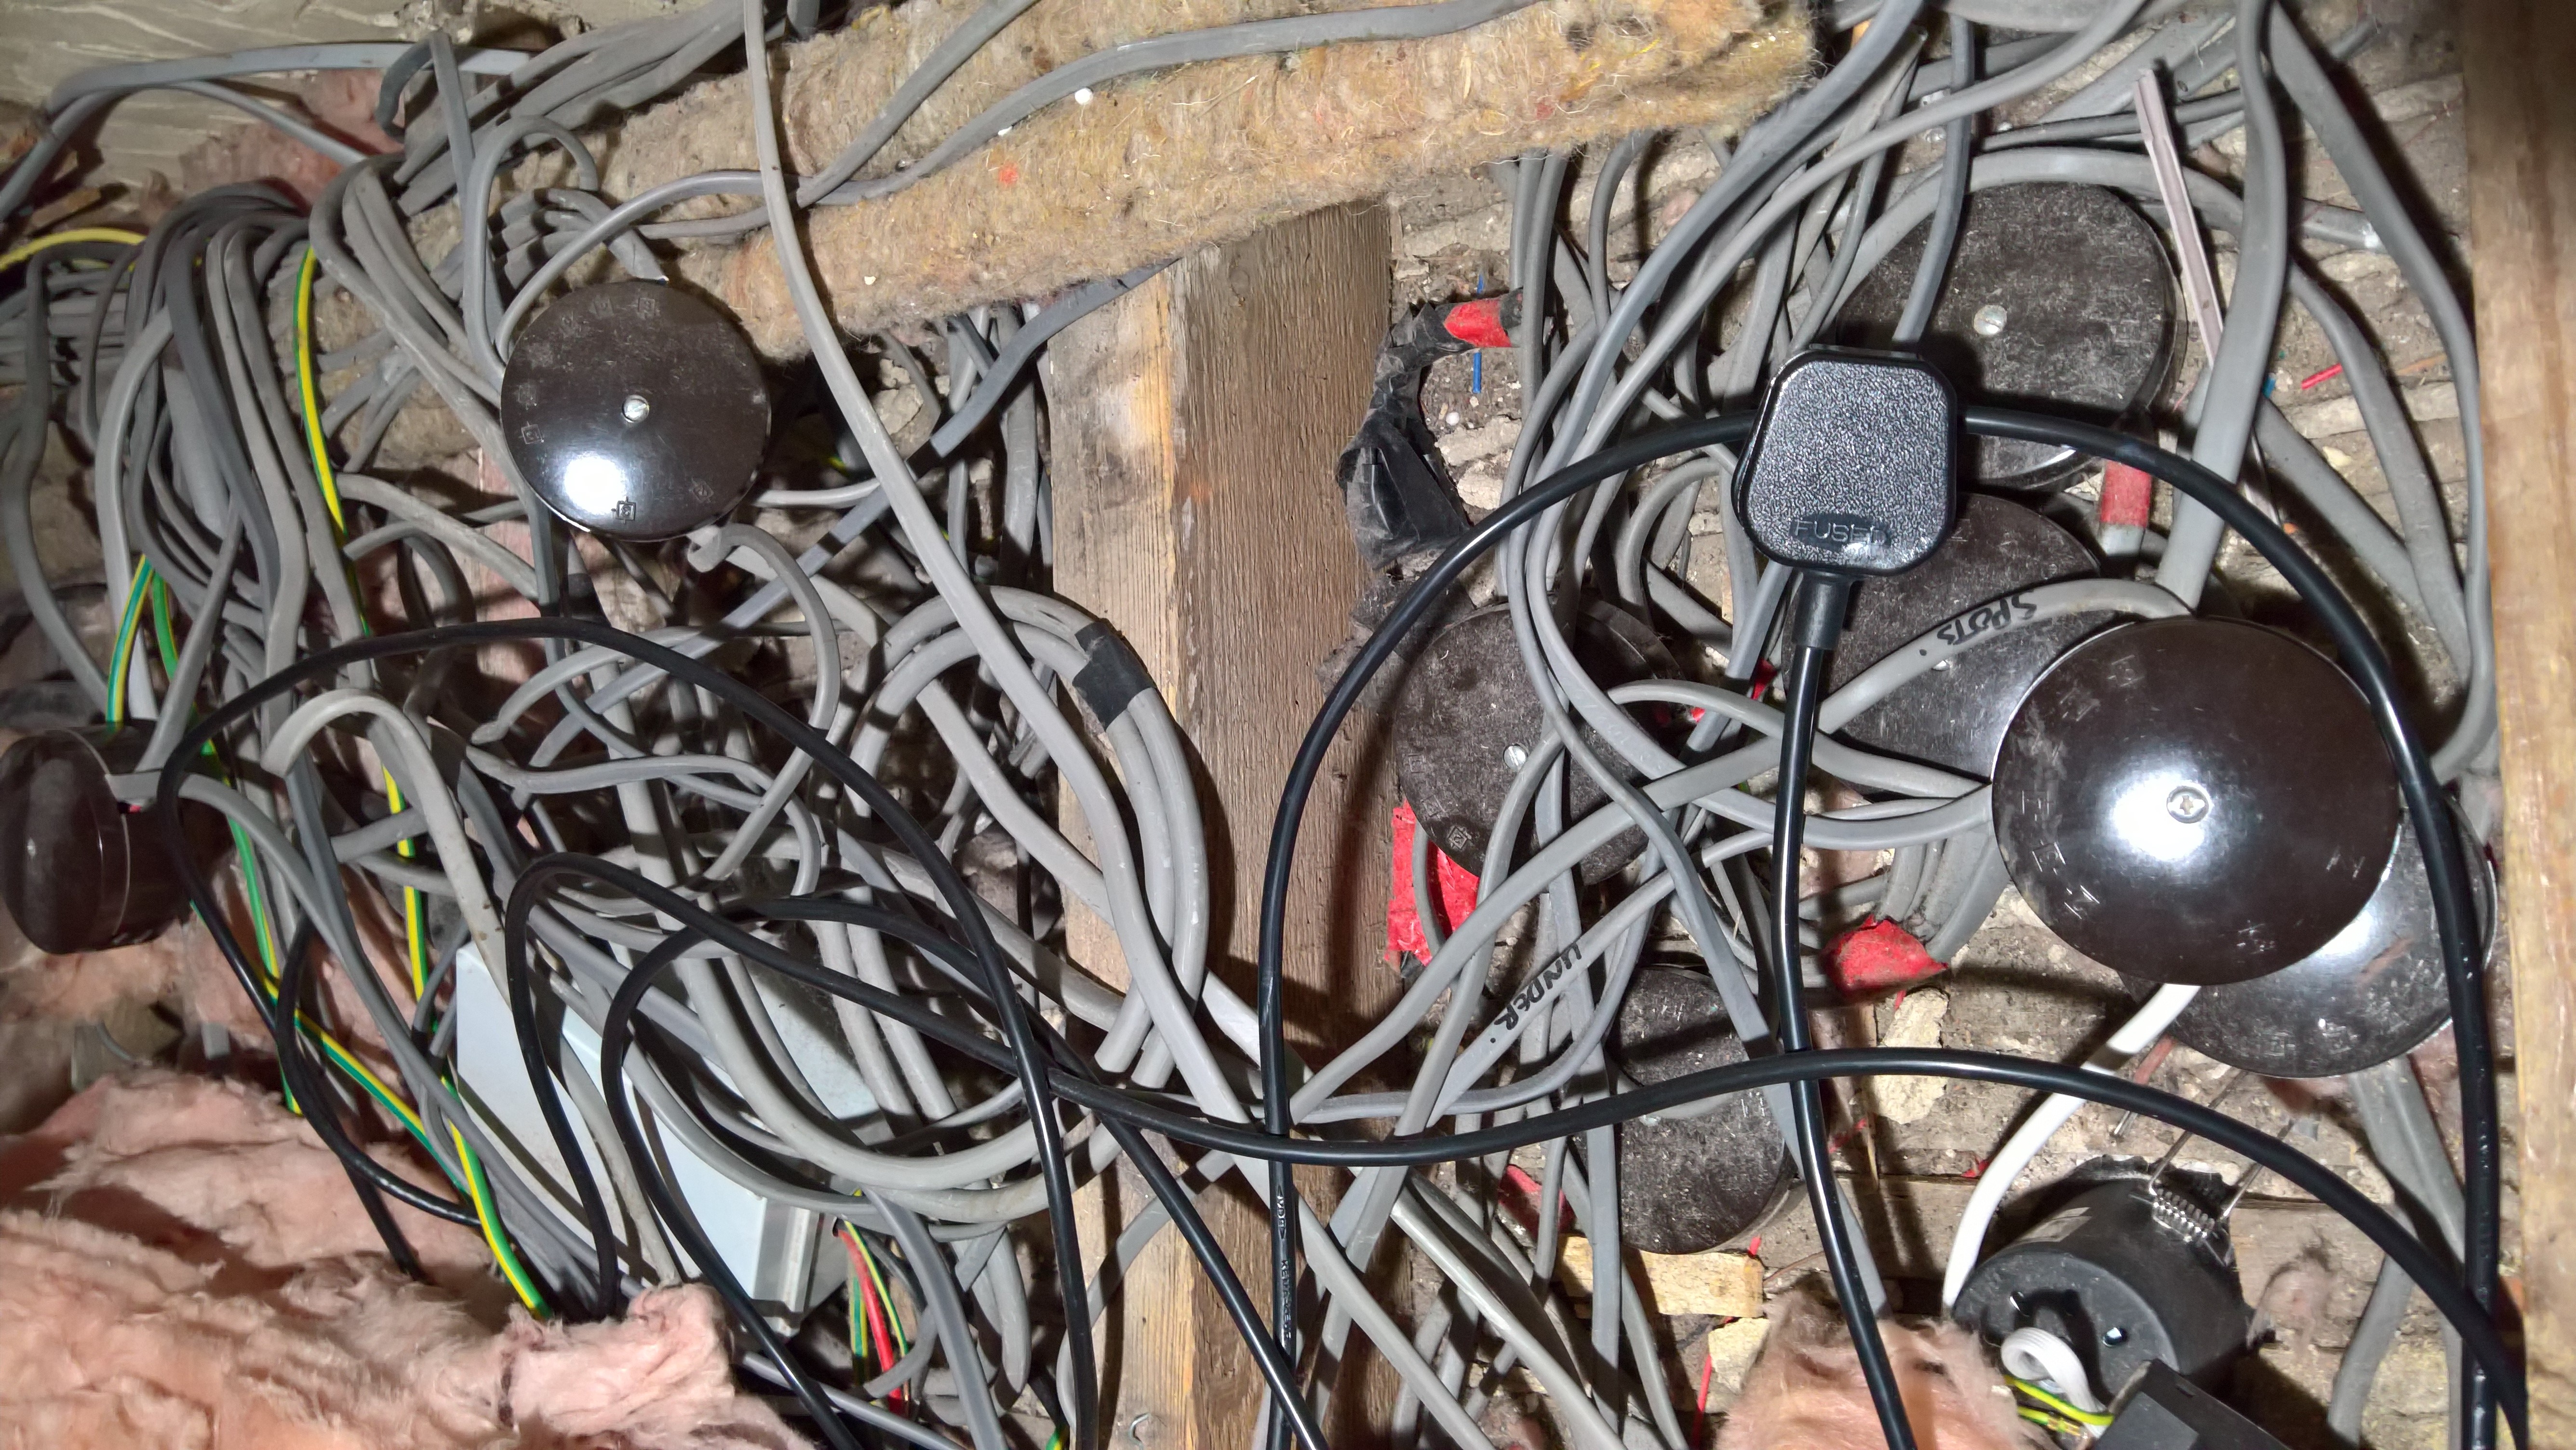 A Very Poor Wiring Installation